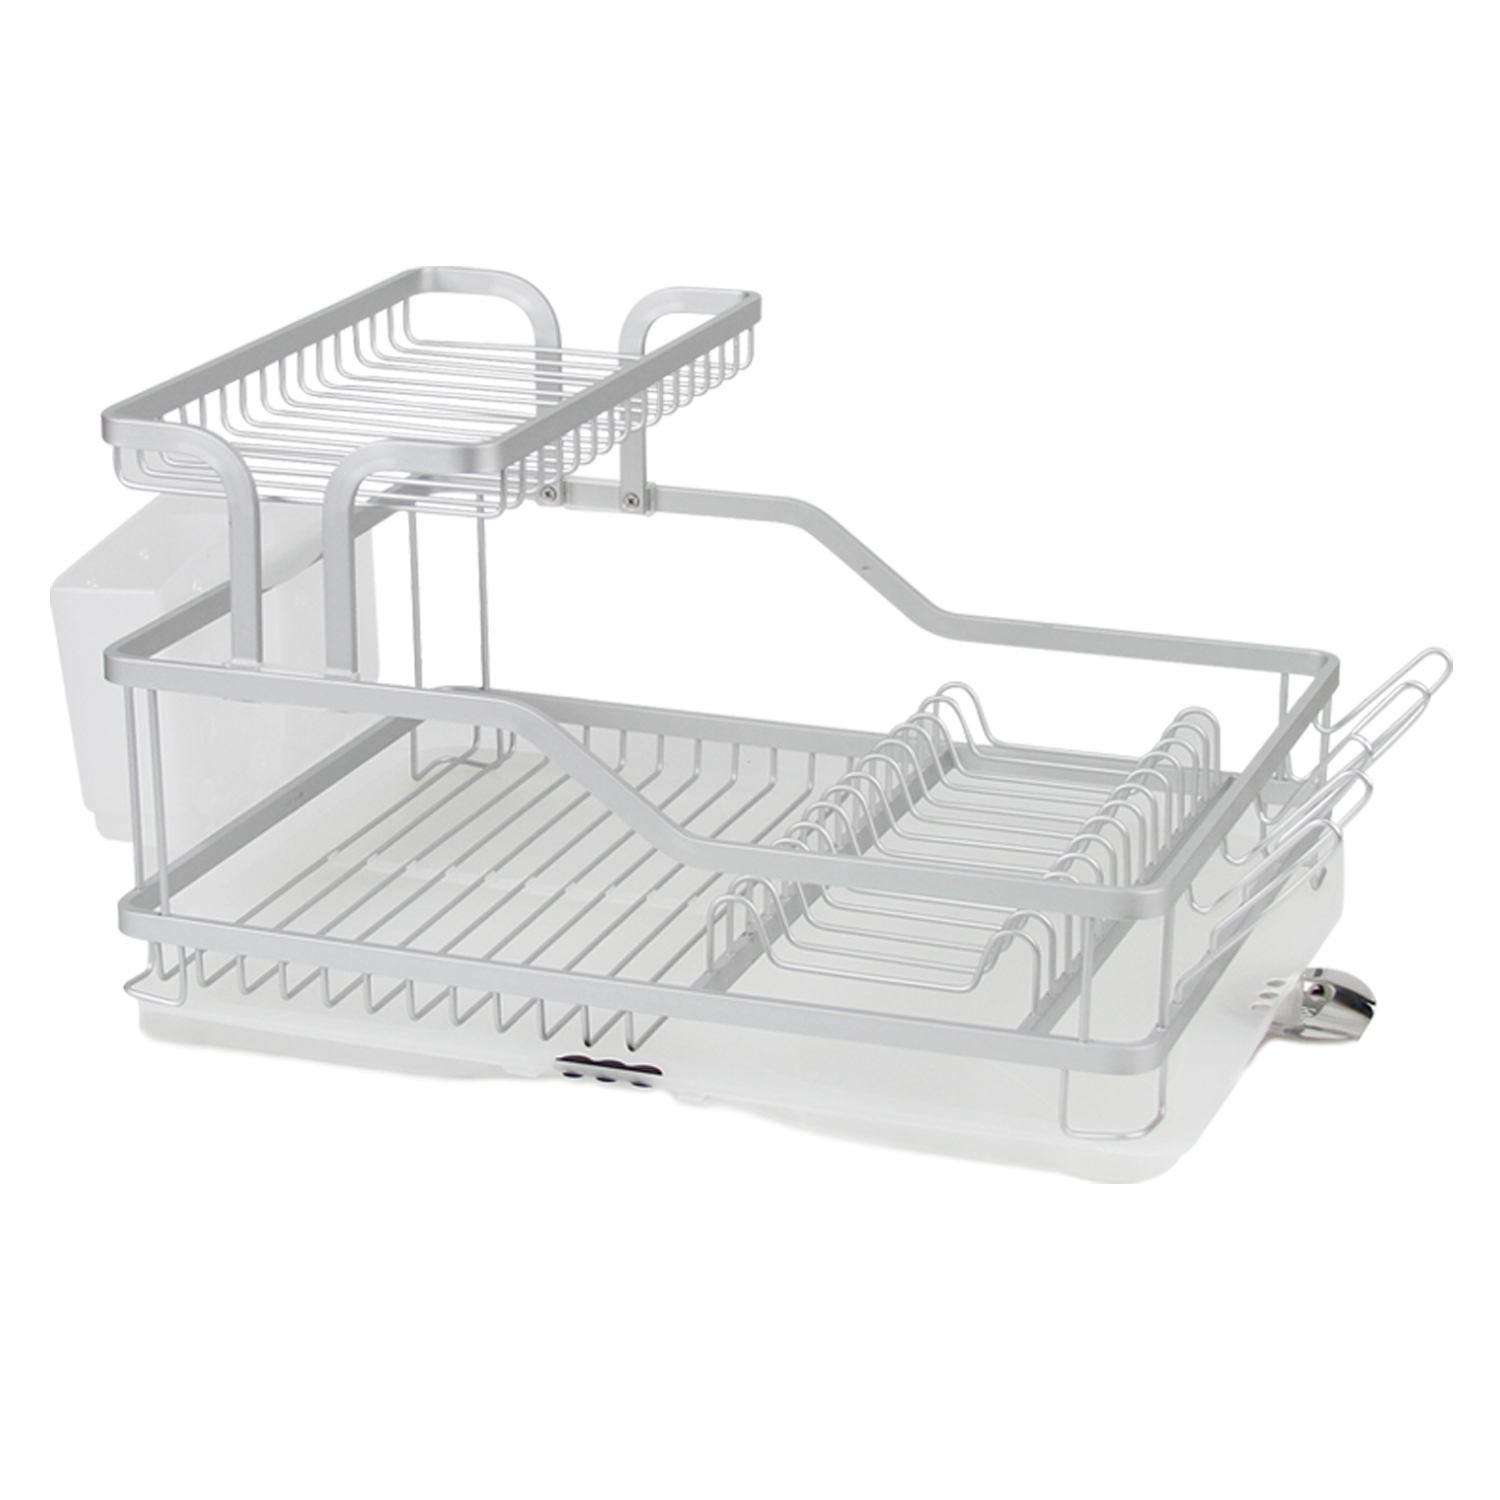 Evelyne Shower Soap Dish Rack with Suction Cup Stainless Steel Rim Organizer